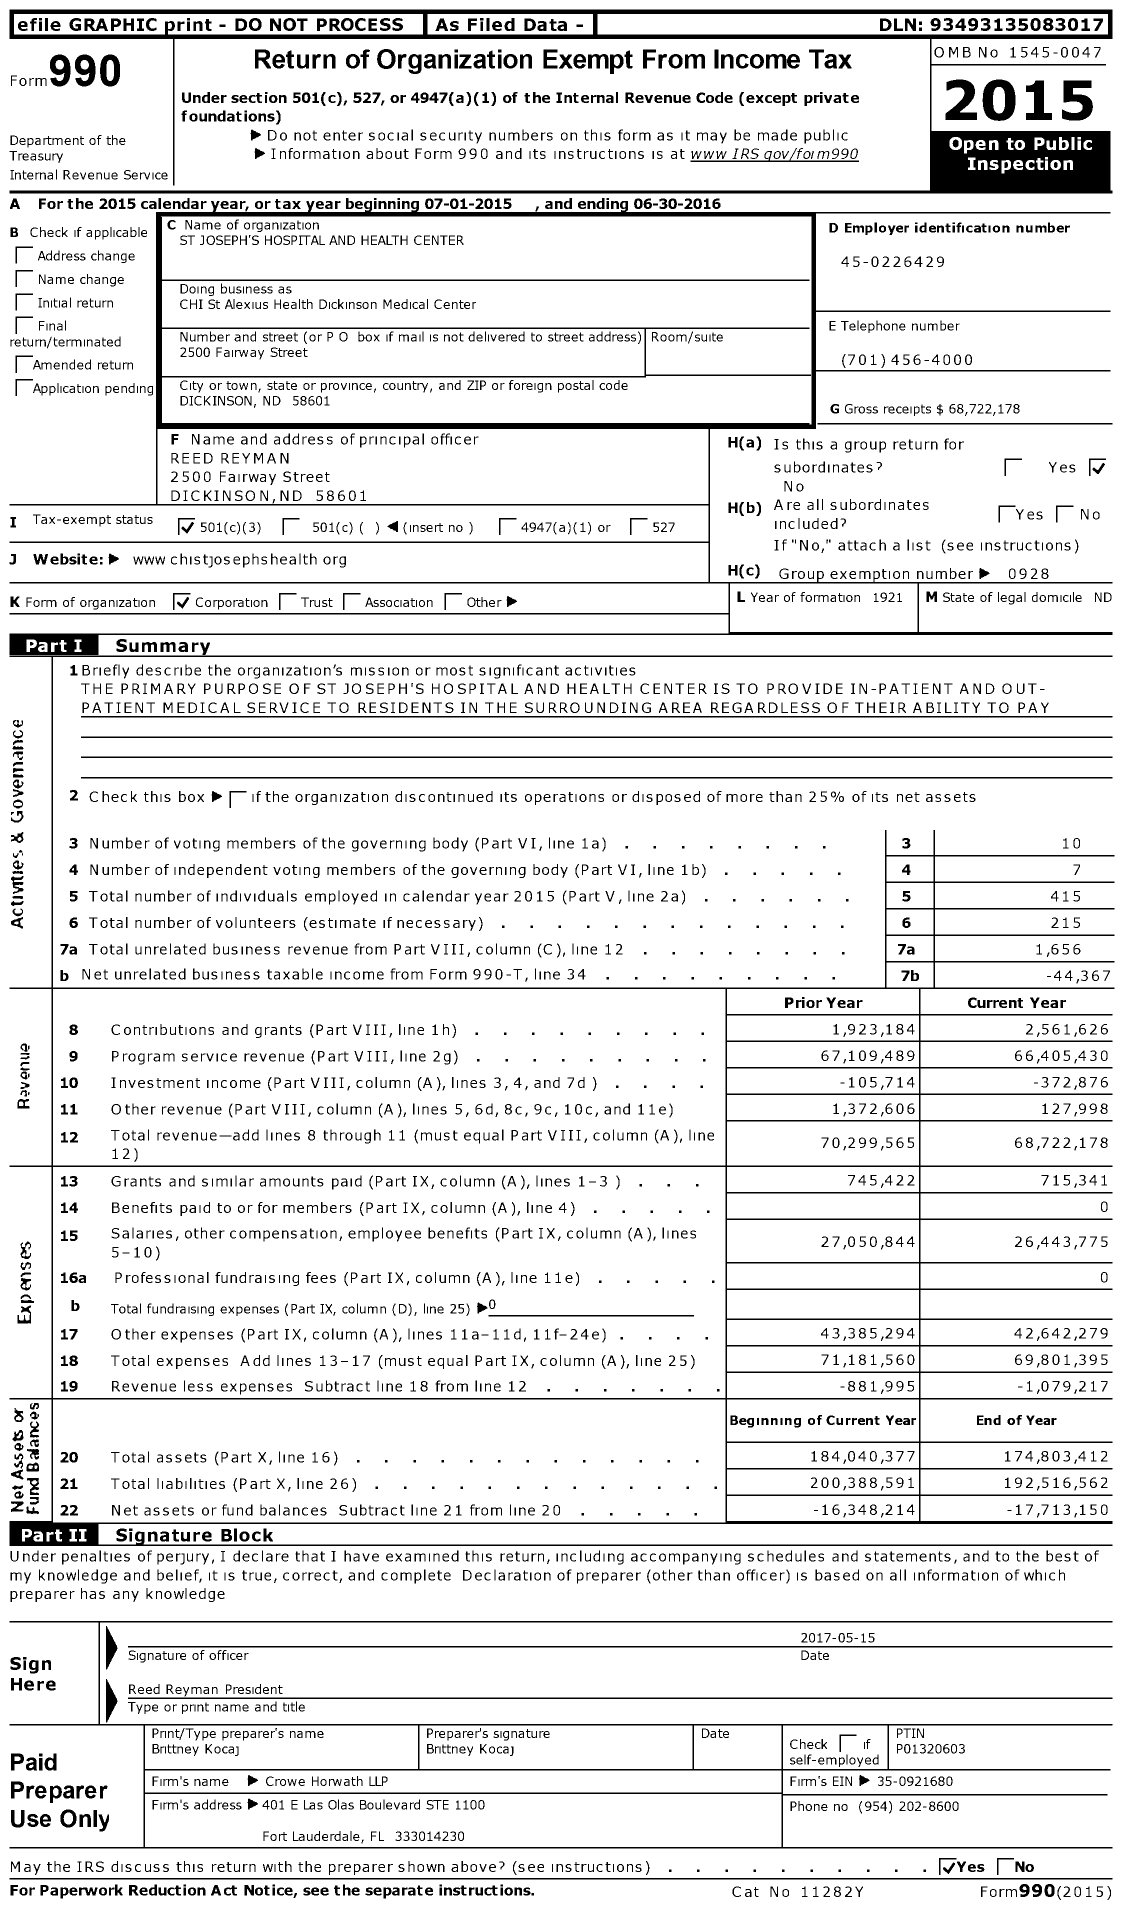 Image of first page of 2015 Form 990 for CHI St Alexius Health Dickinson Medical Center